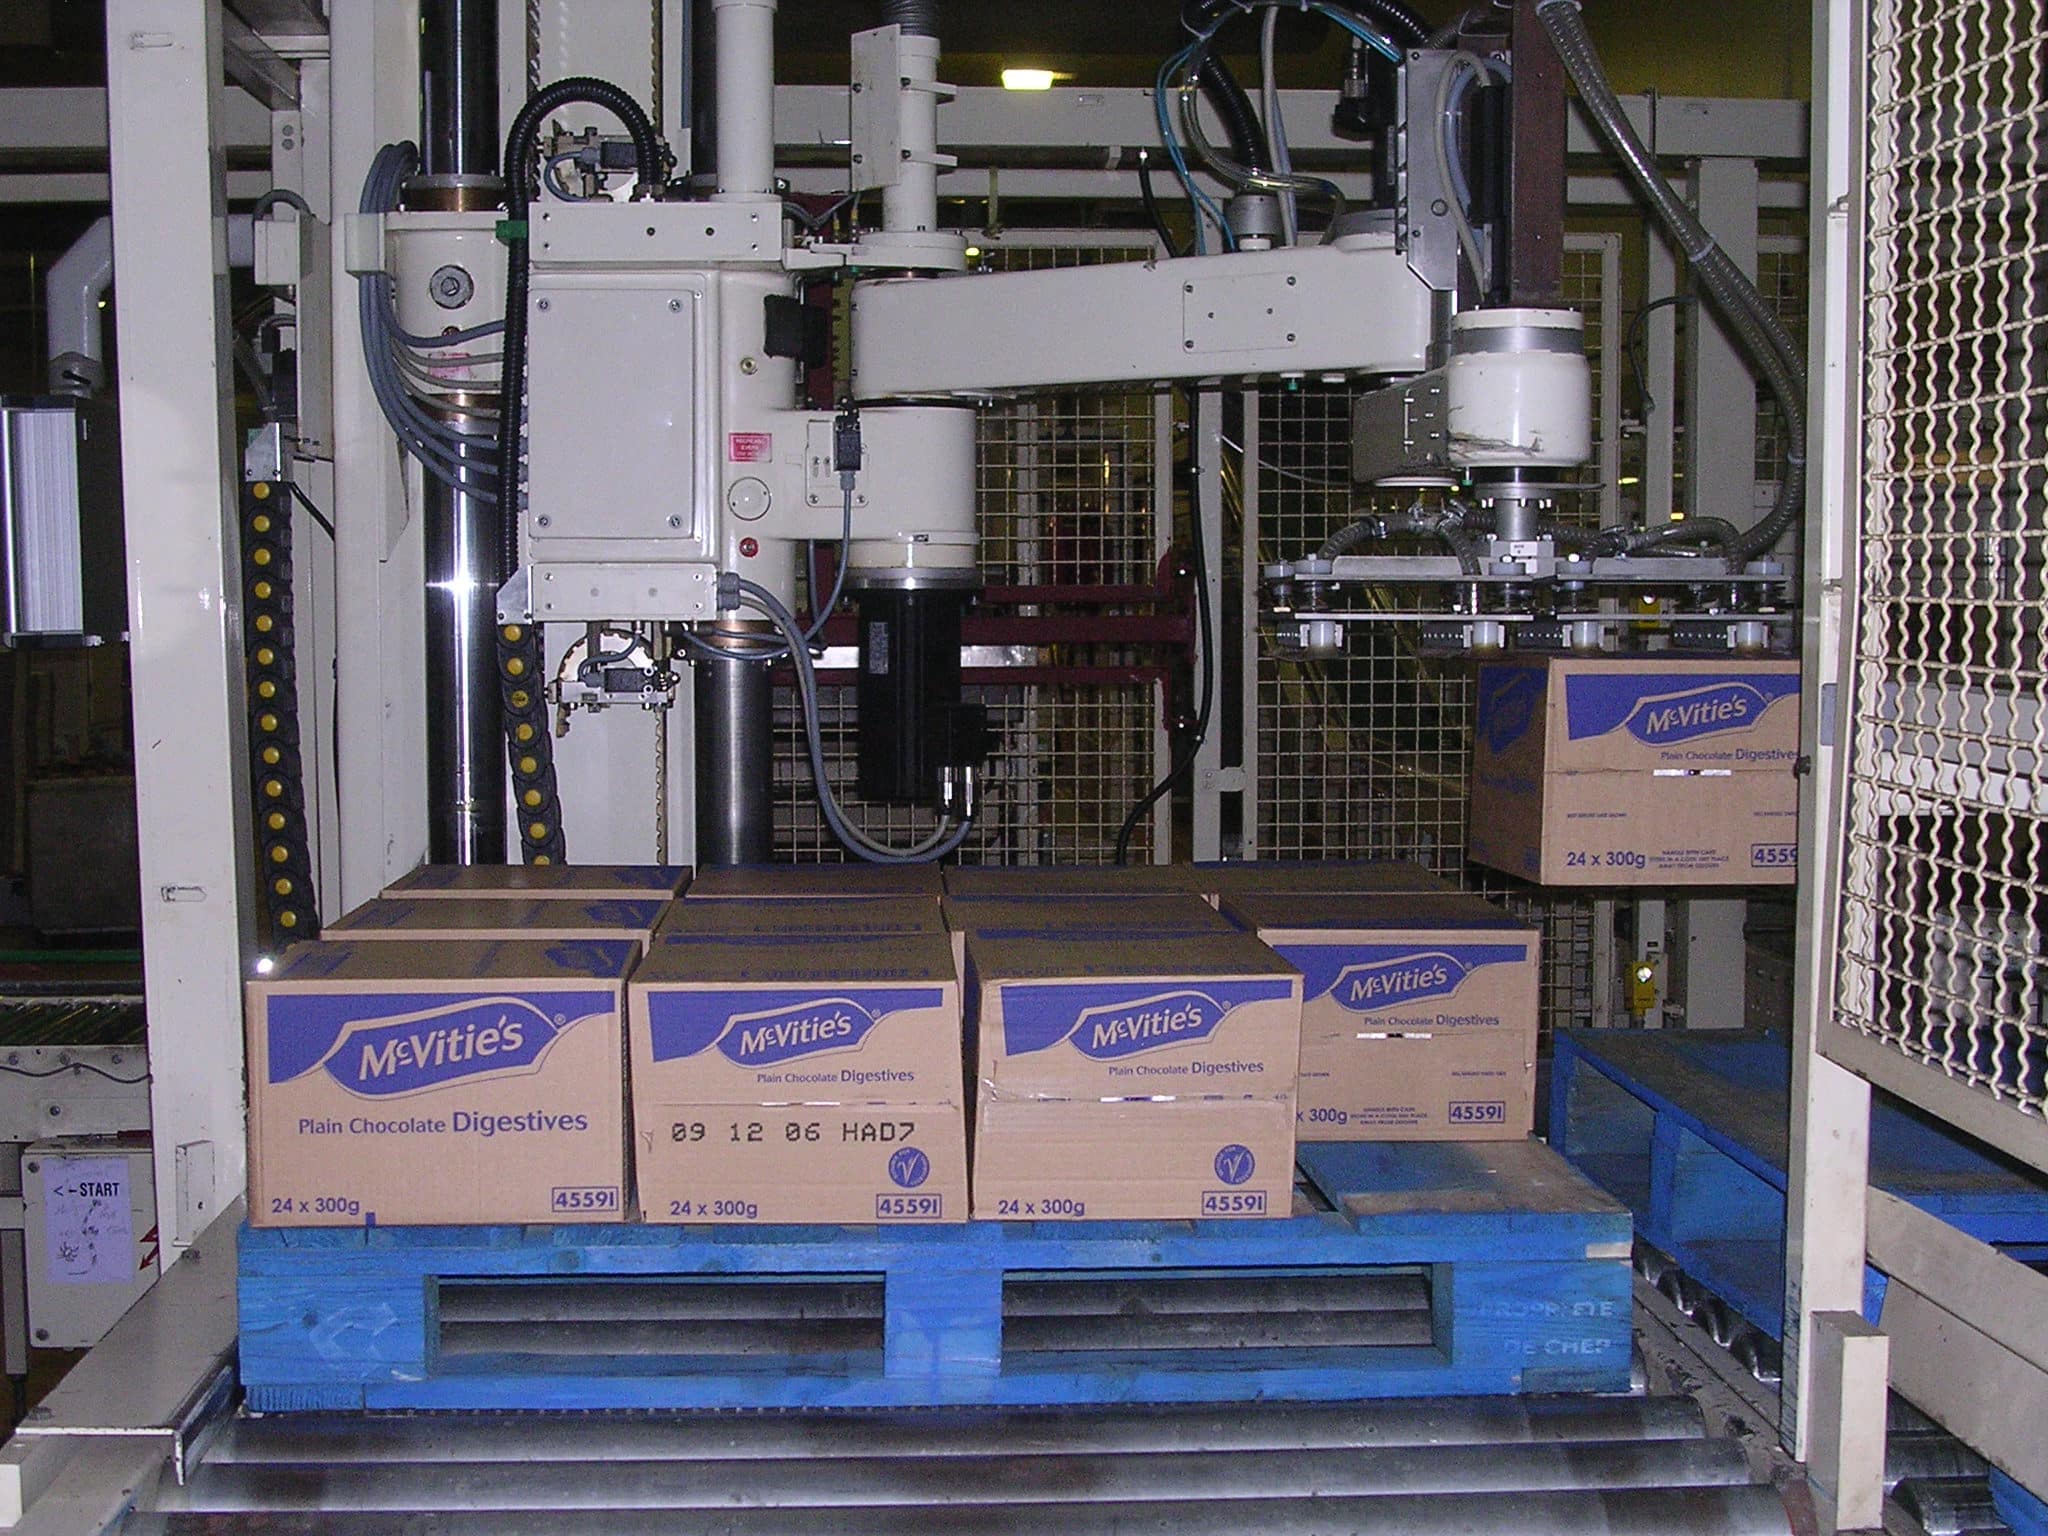 Palletiser stacking boxes of biscuits. Just one example of robotics in use.